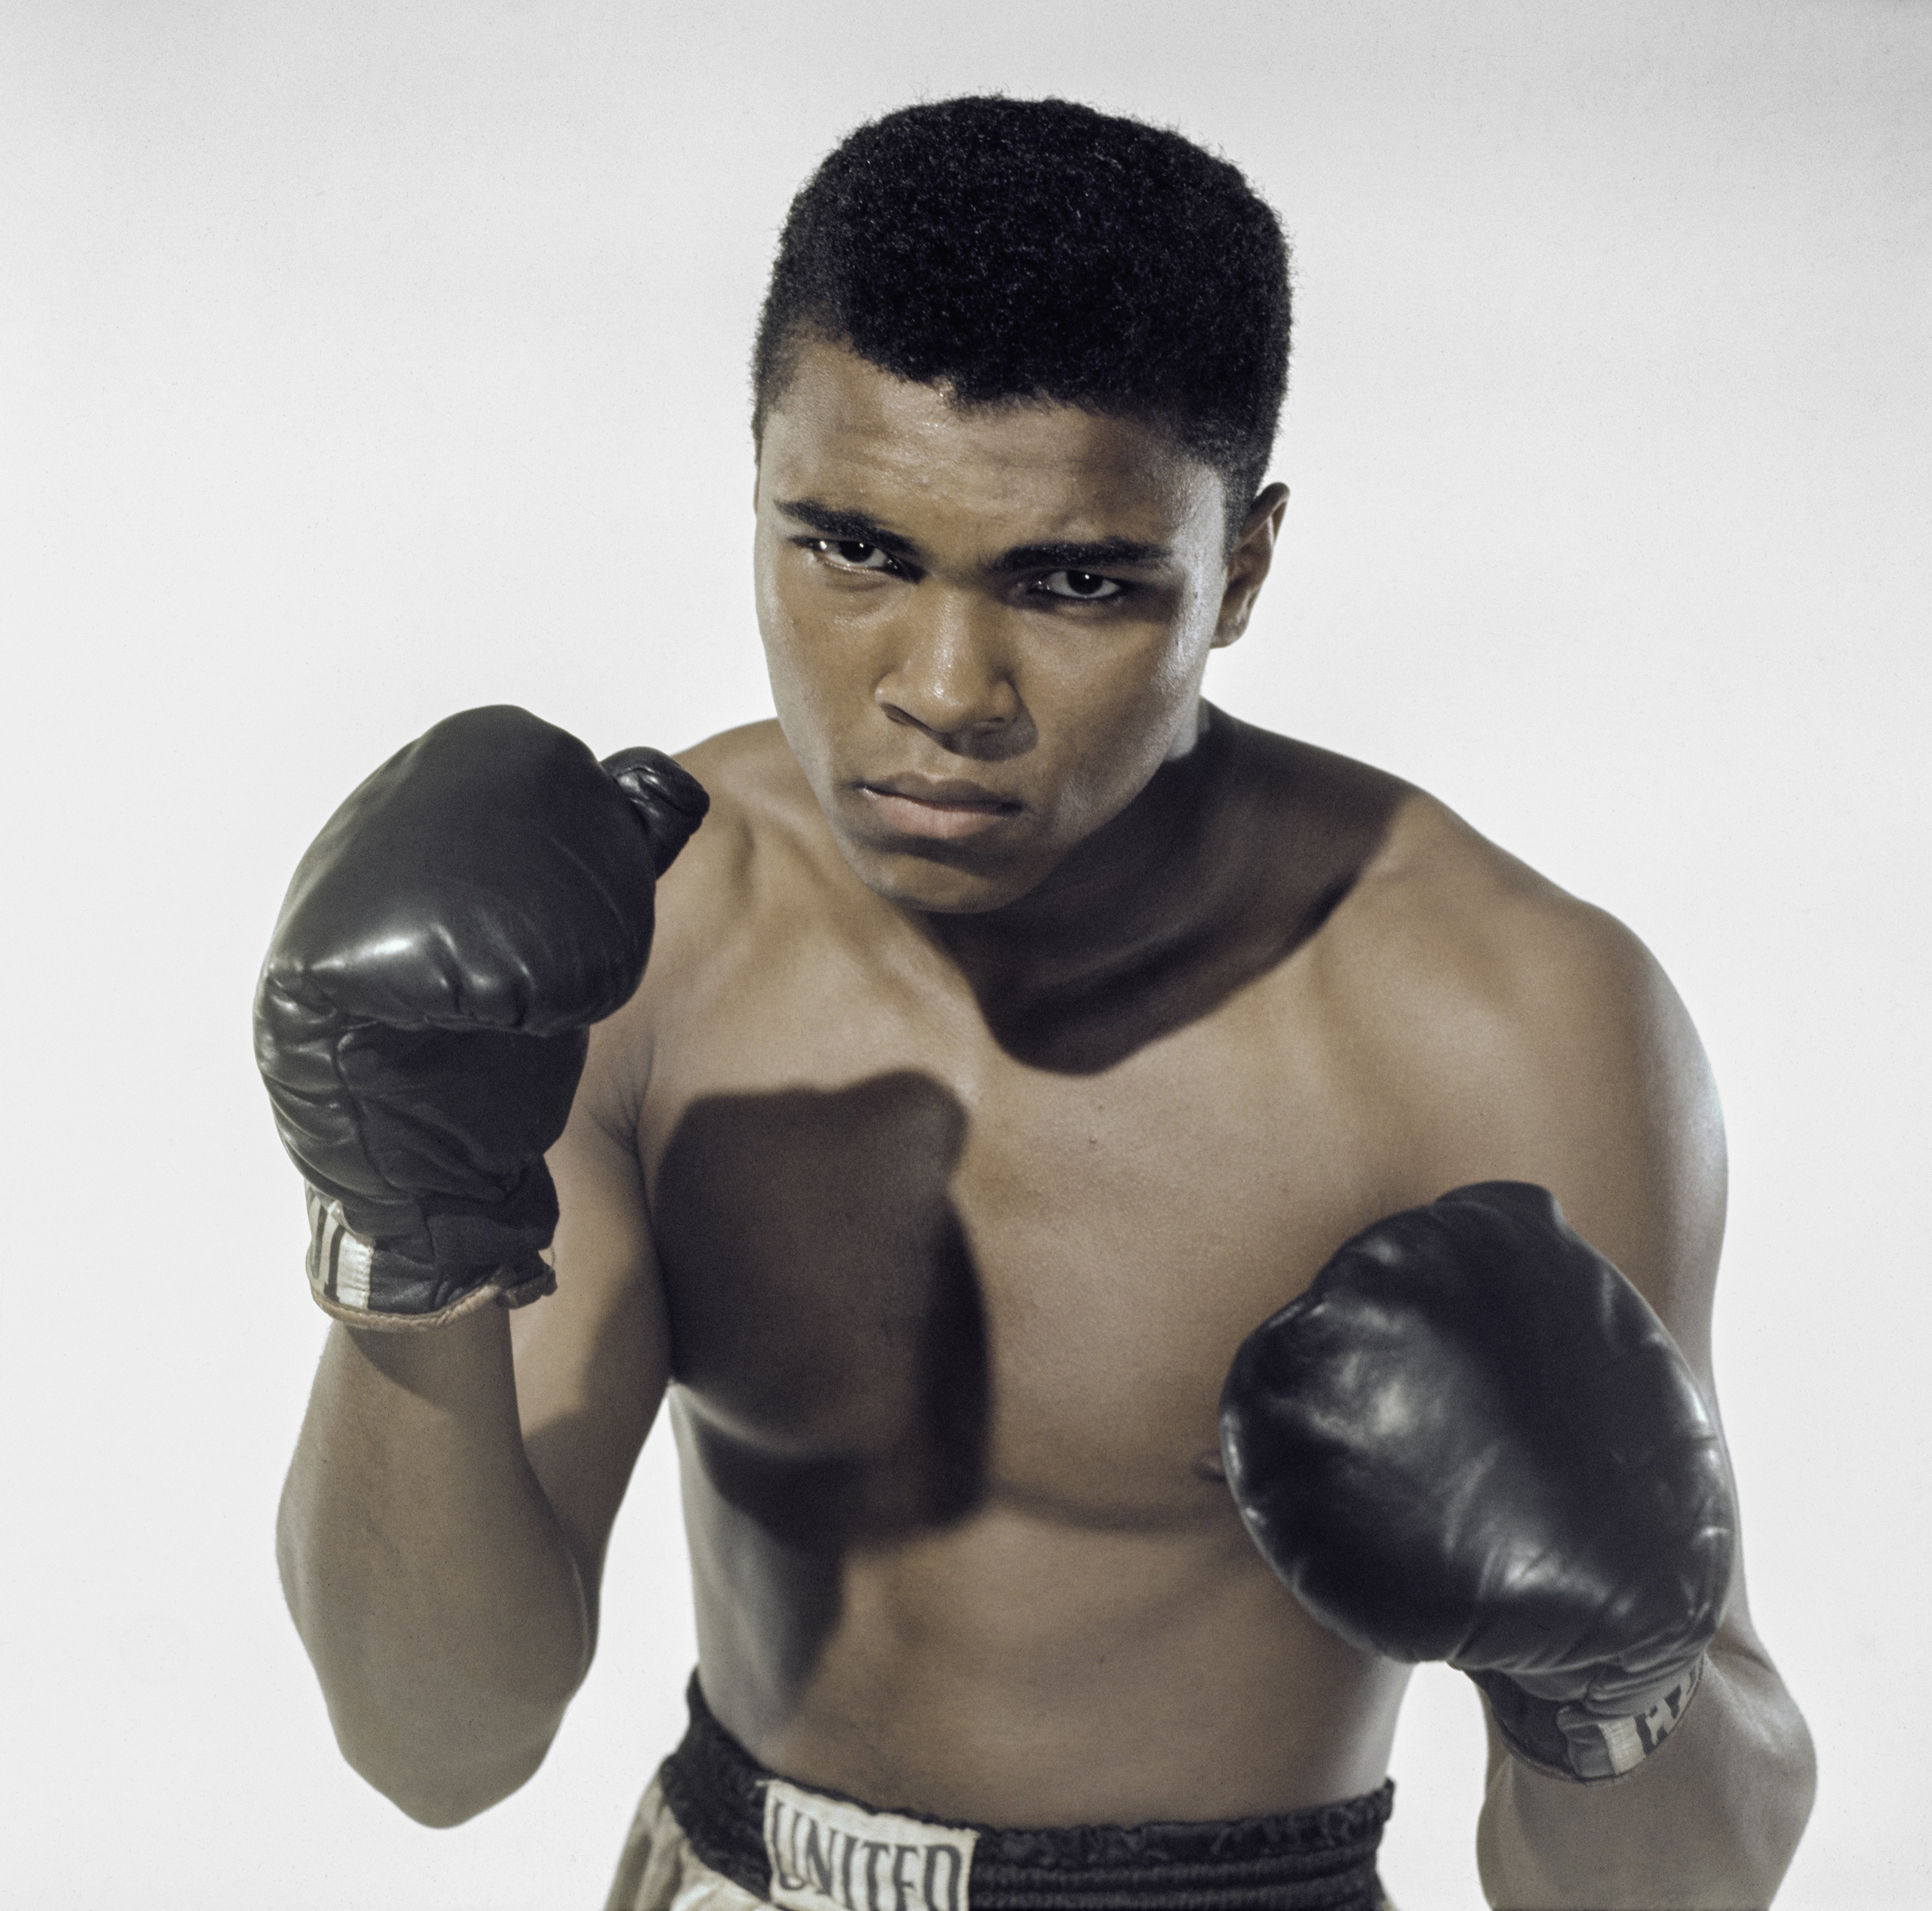 Muhammad Ali is considered The Greatest